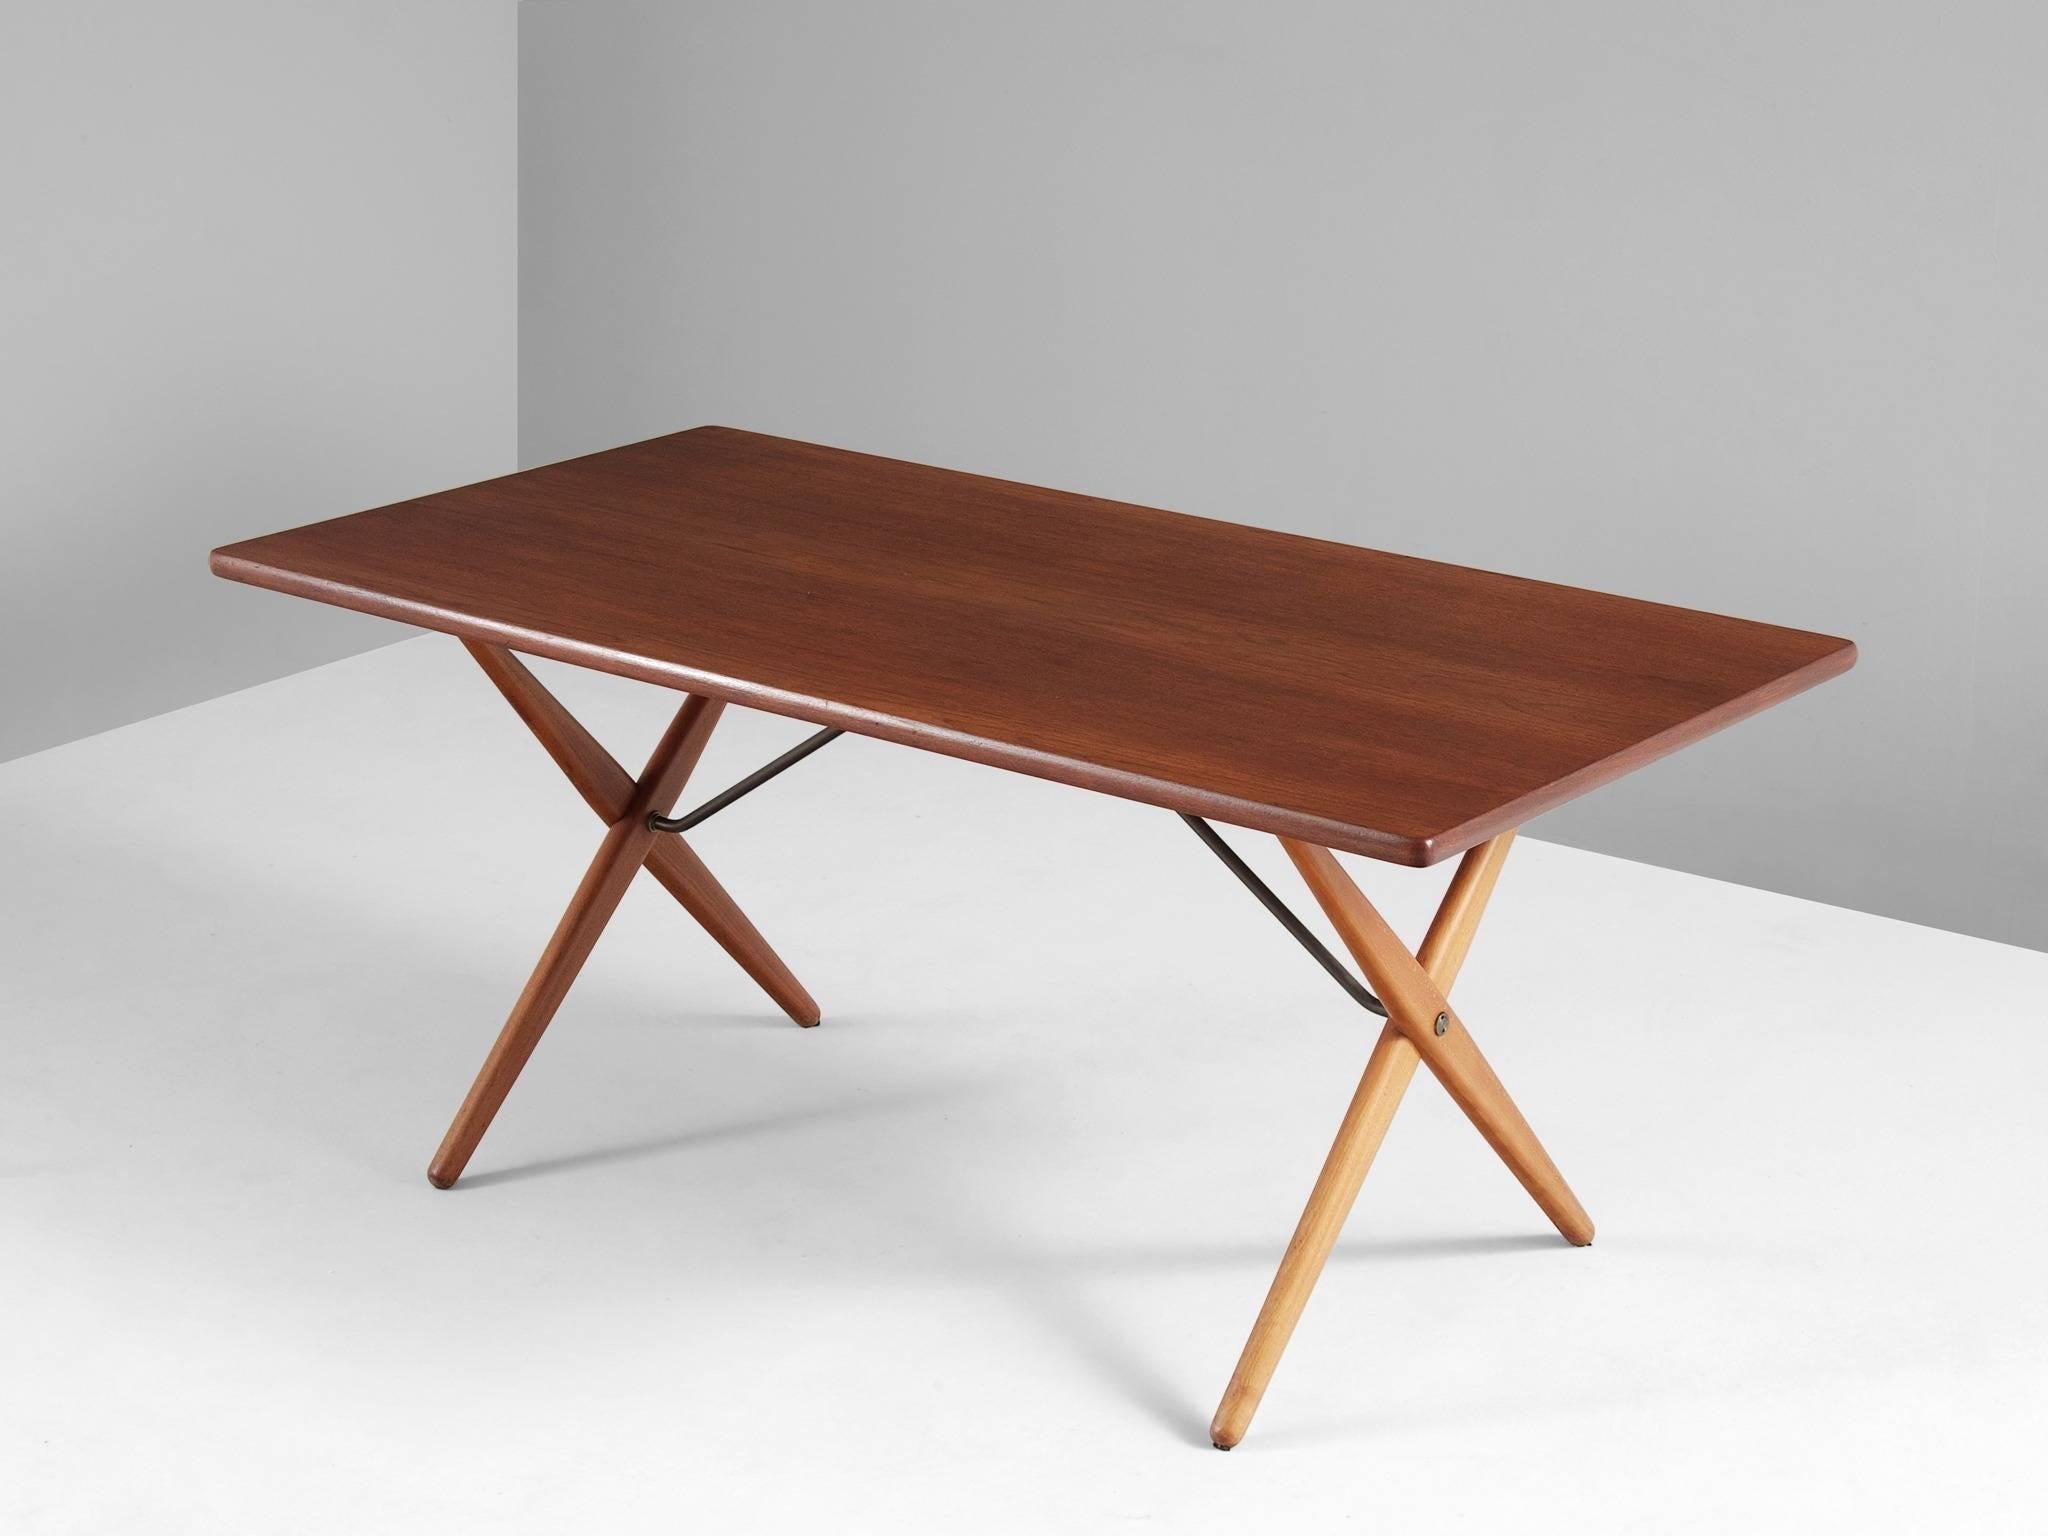 Table model AT-303, in teak, oak and metal, by Hans J. Wegner for Andreas Tuck, Denmark, 1955.

Dining table with elegant X-shaped legs, by Danish Designer Hans Wegner. This table is considered as one of the best known designs from Wenger. From a